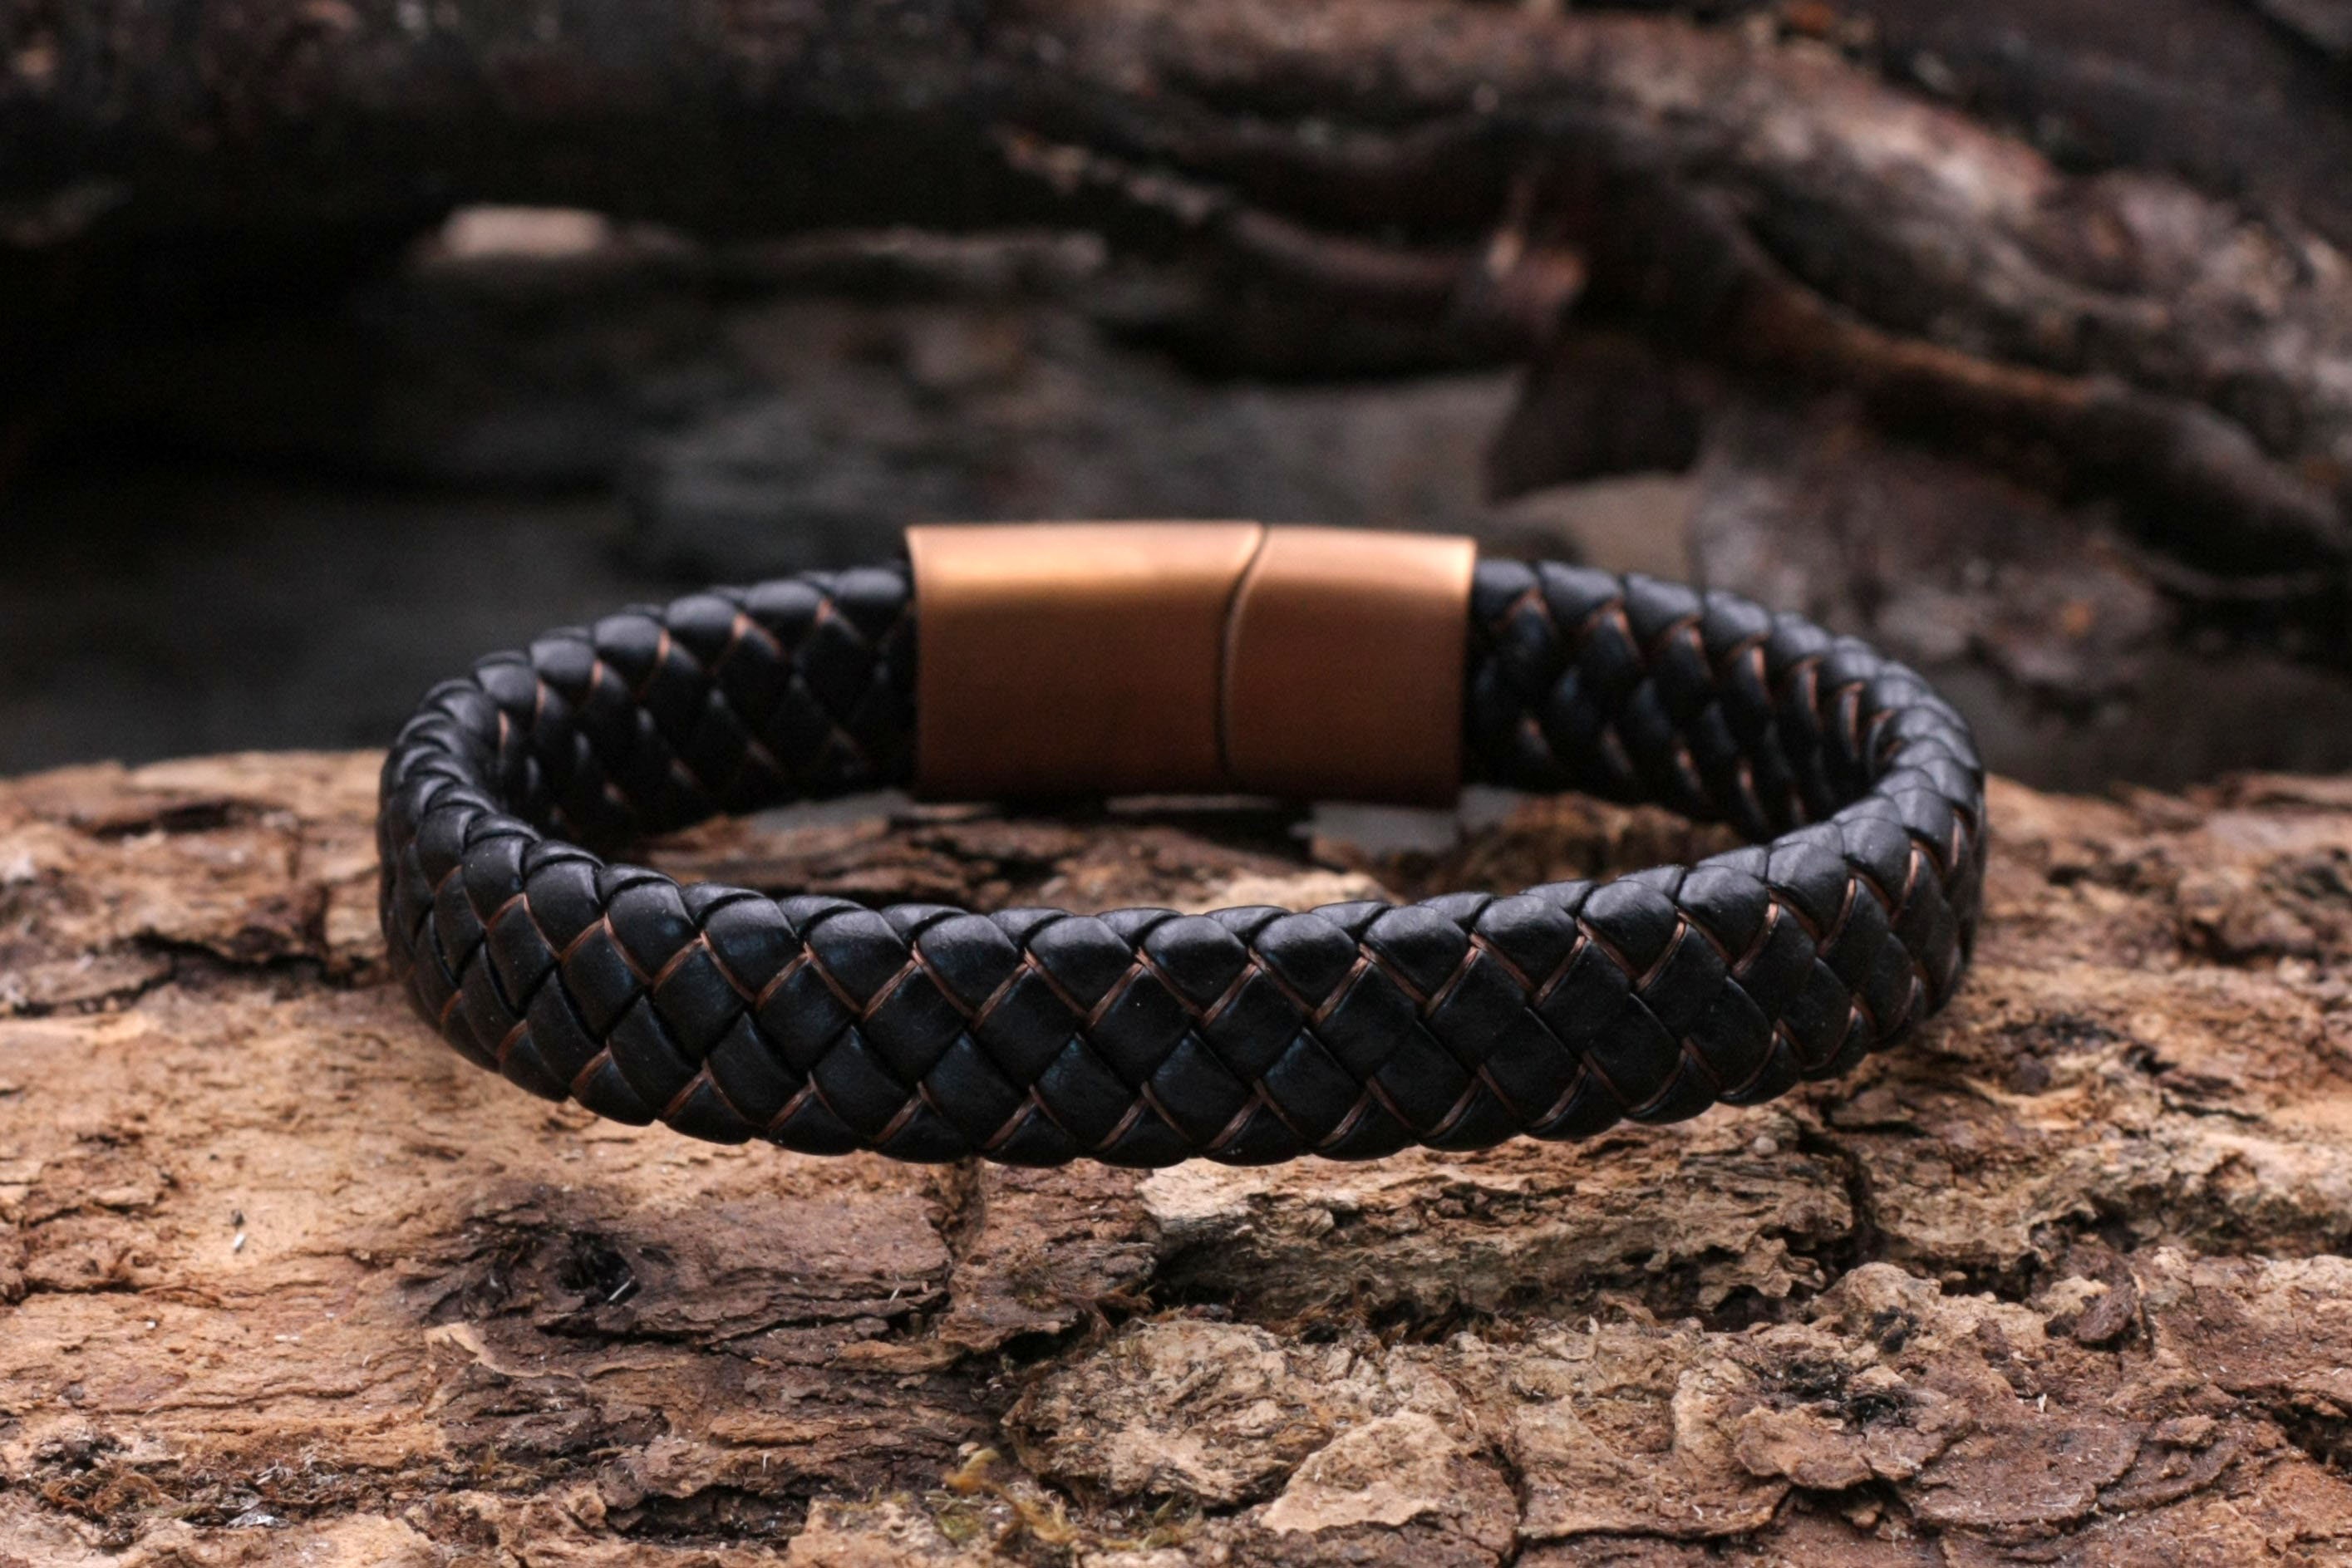 Men's Black Braided Leather Rope Bracelet Stainless Steel Magnetic Clasp  Cuff